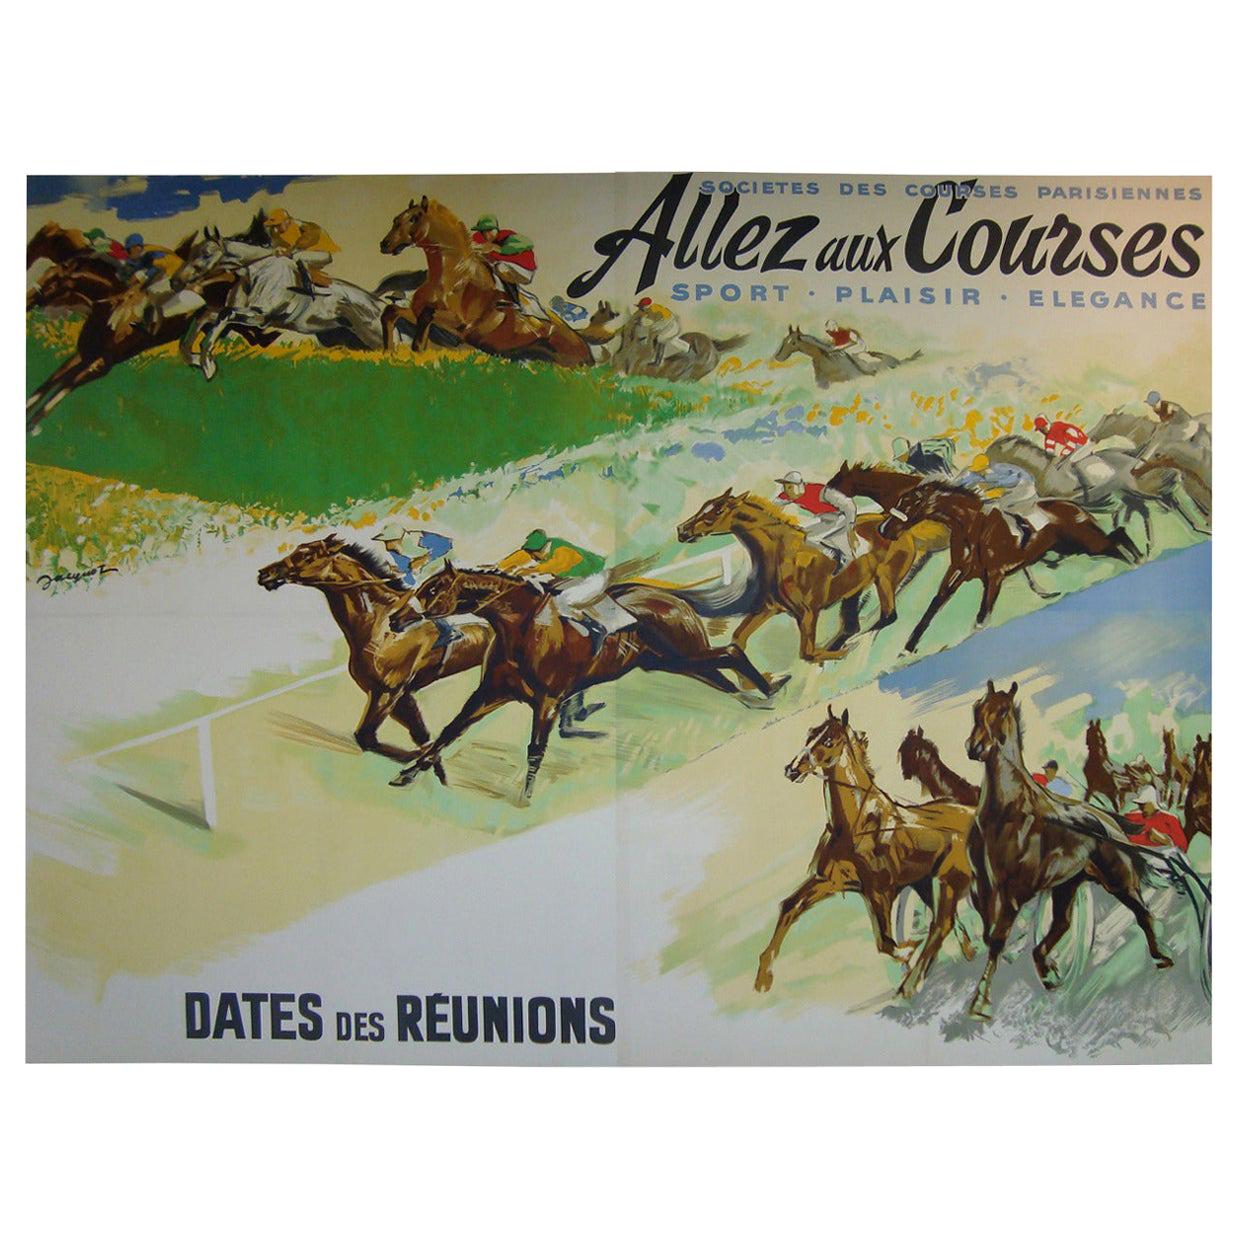 Giant French Horse Racing Poster Mural by Jacquot, circa 1930s